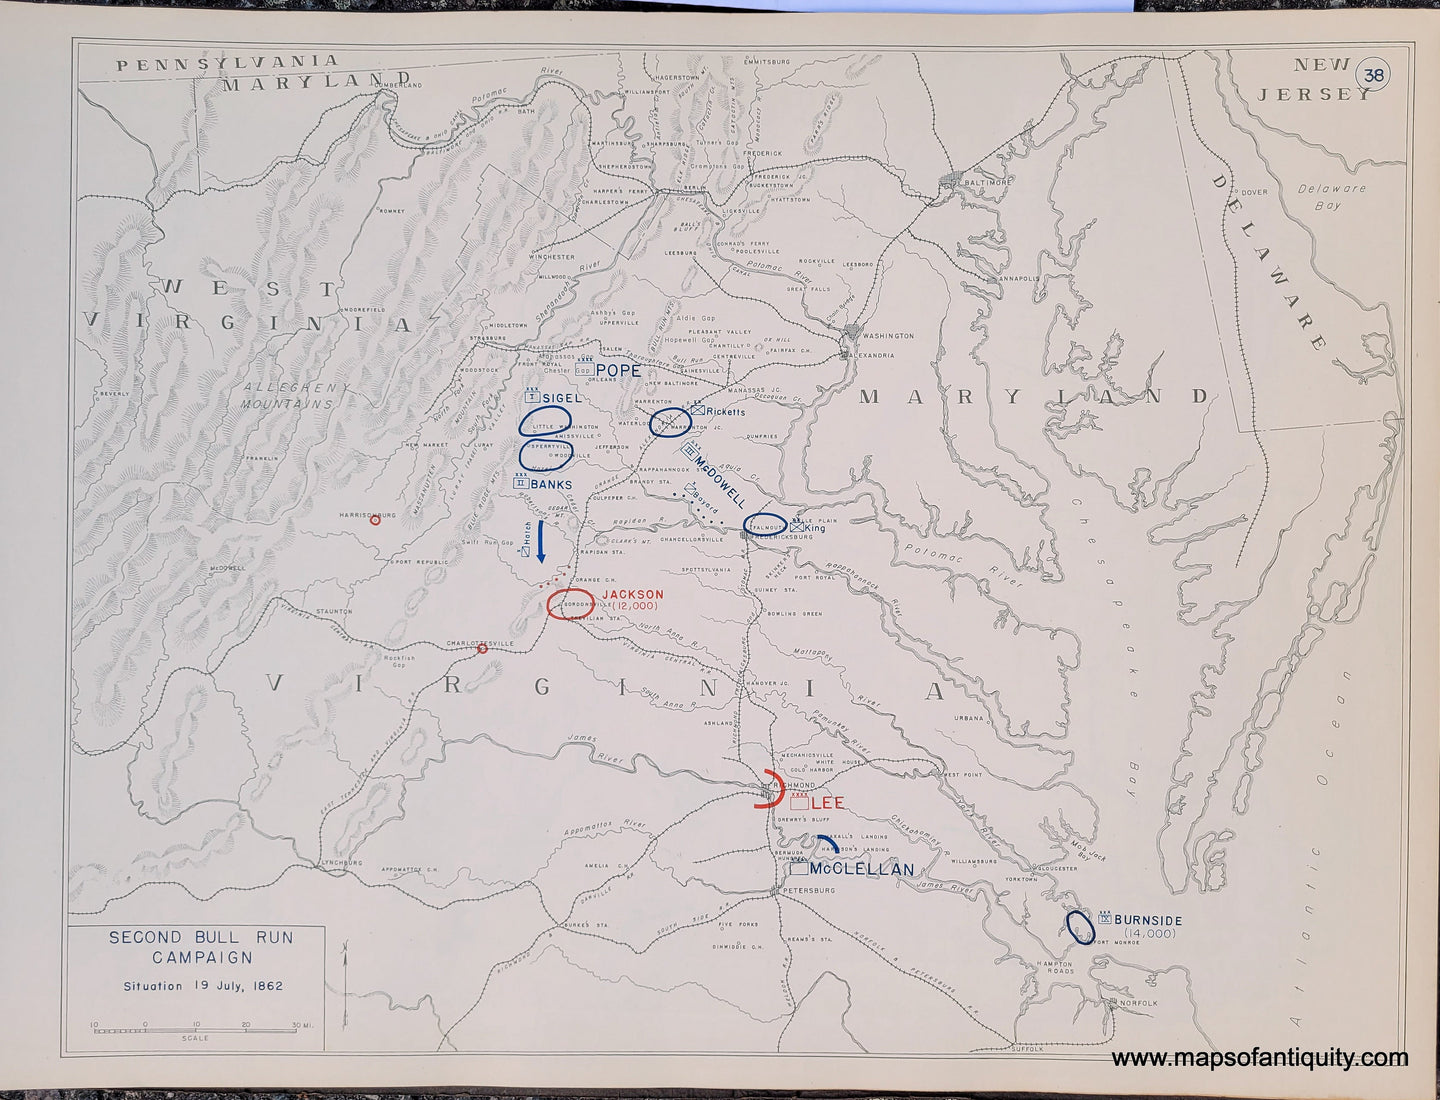 Genuine-Antique-Map-Second-Bull-Run-Campaign-Situation-19-July-1862-1948-Matthew-Forney-Steele-Dept-of-Military-Art-and-Engineering-US-Military-Academy-West-Point-Maps-Of-Antiquity